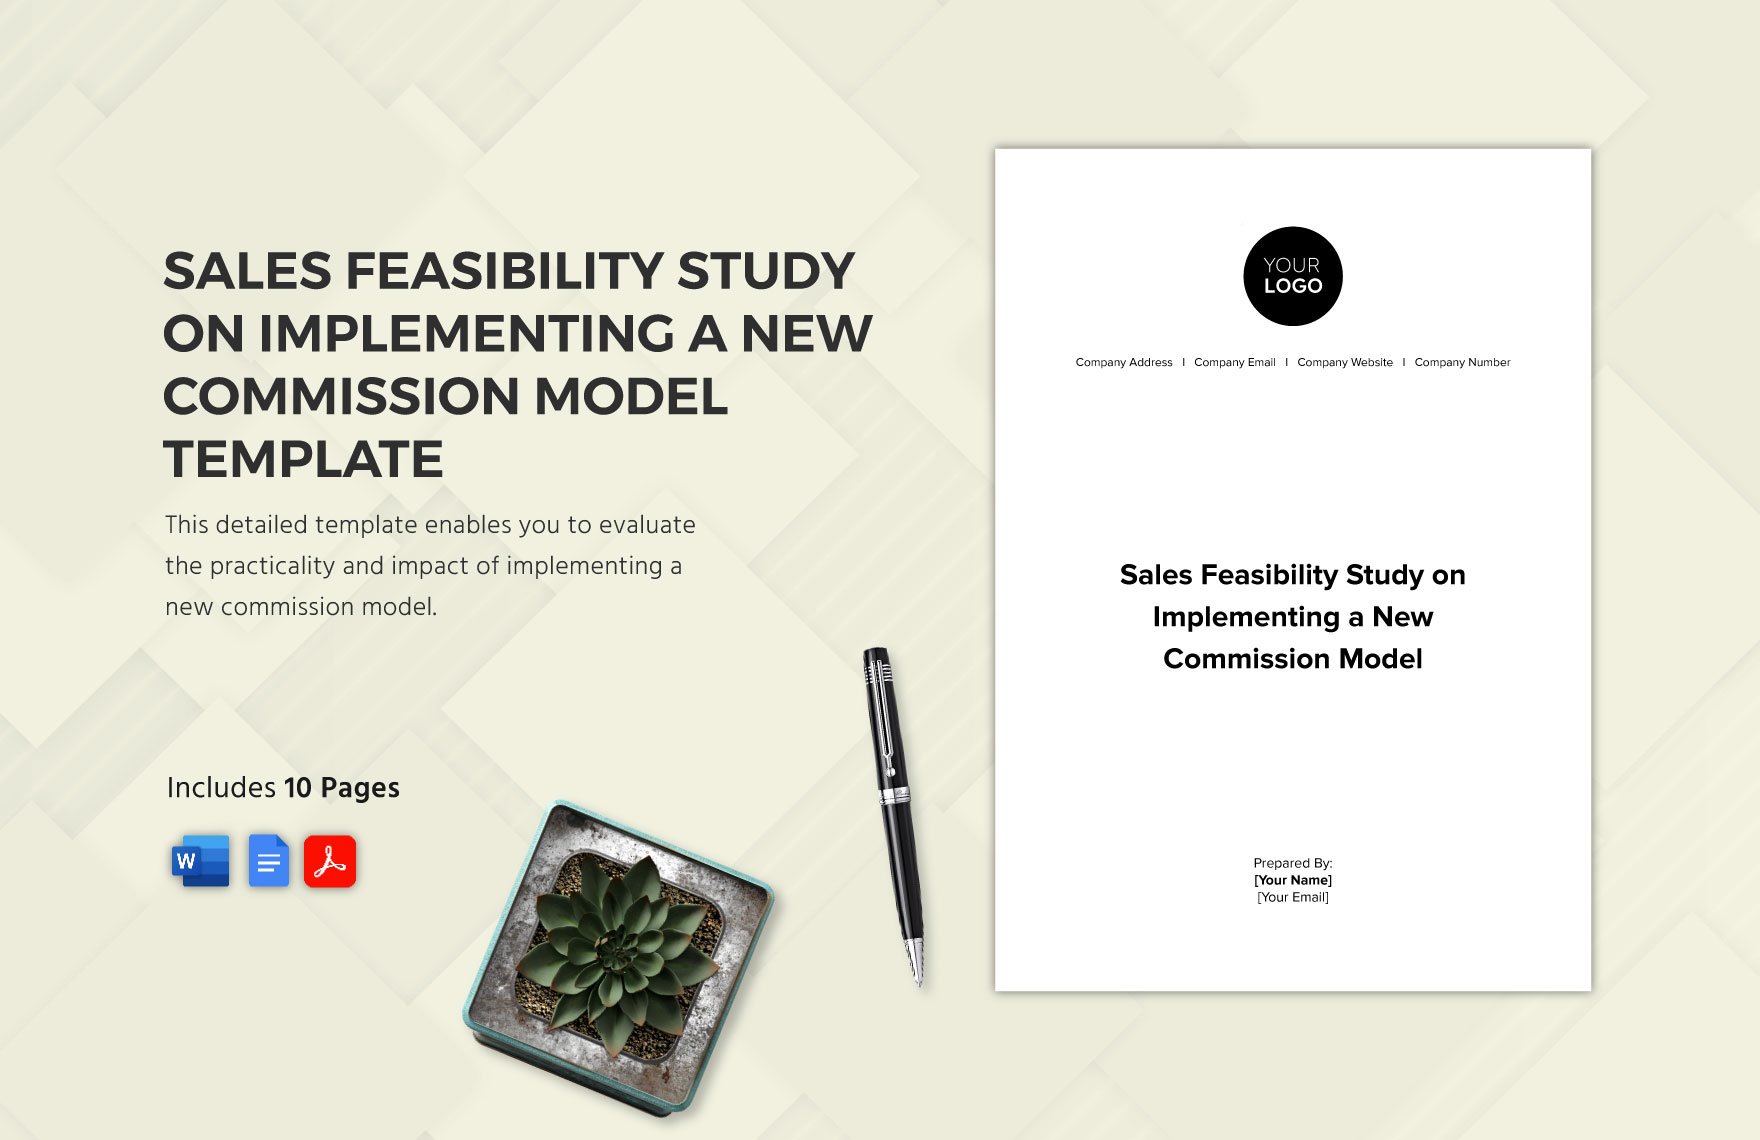 Sales Feasibility Study on Implementing a New Commission Model Template